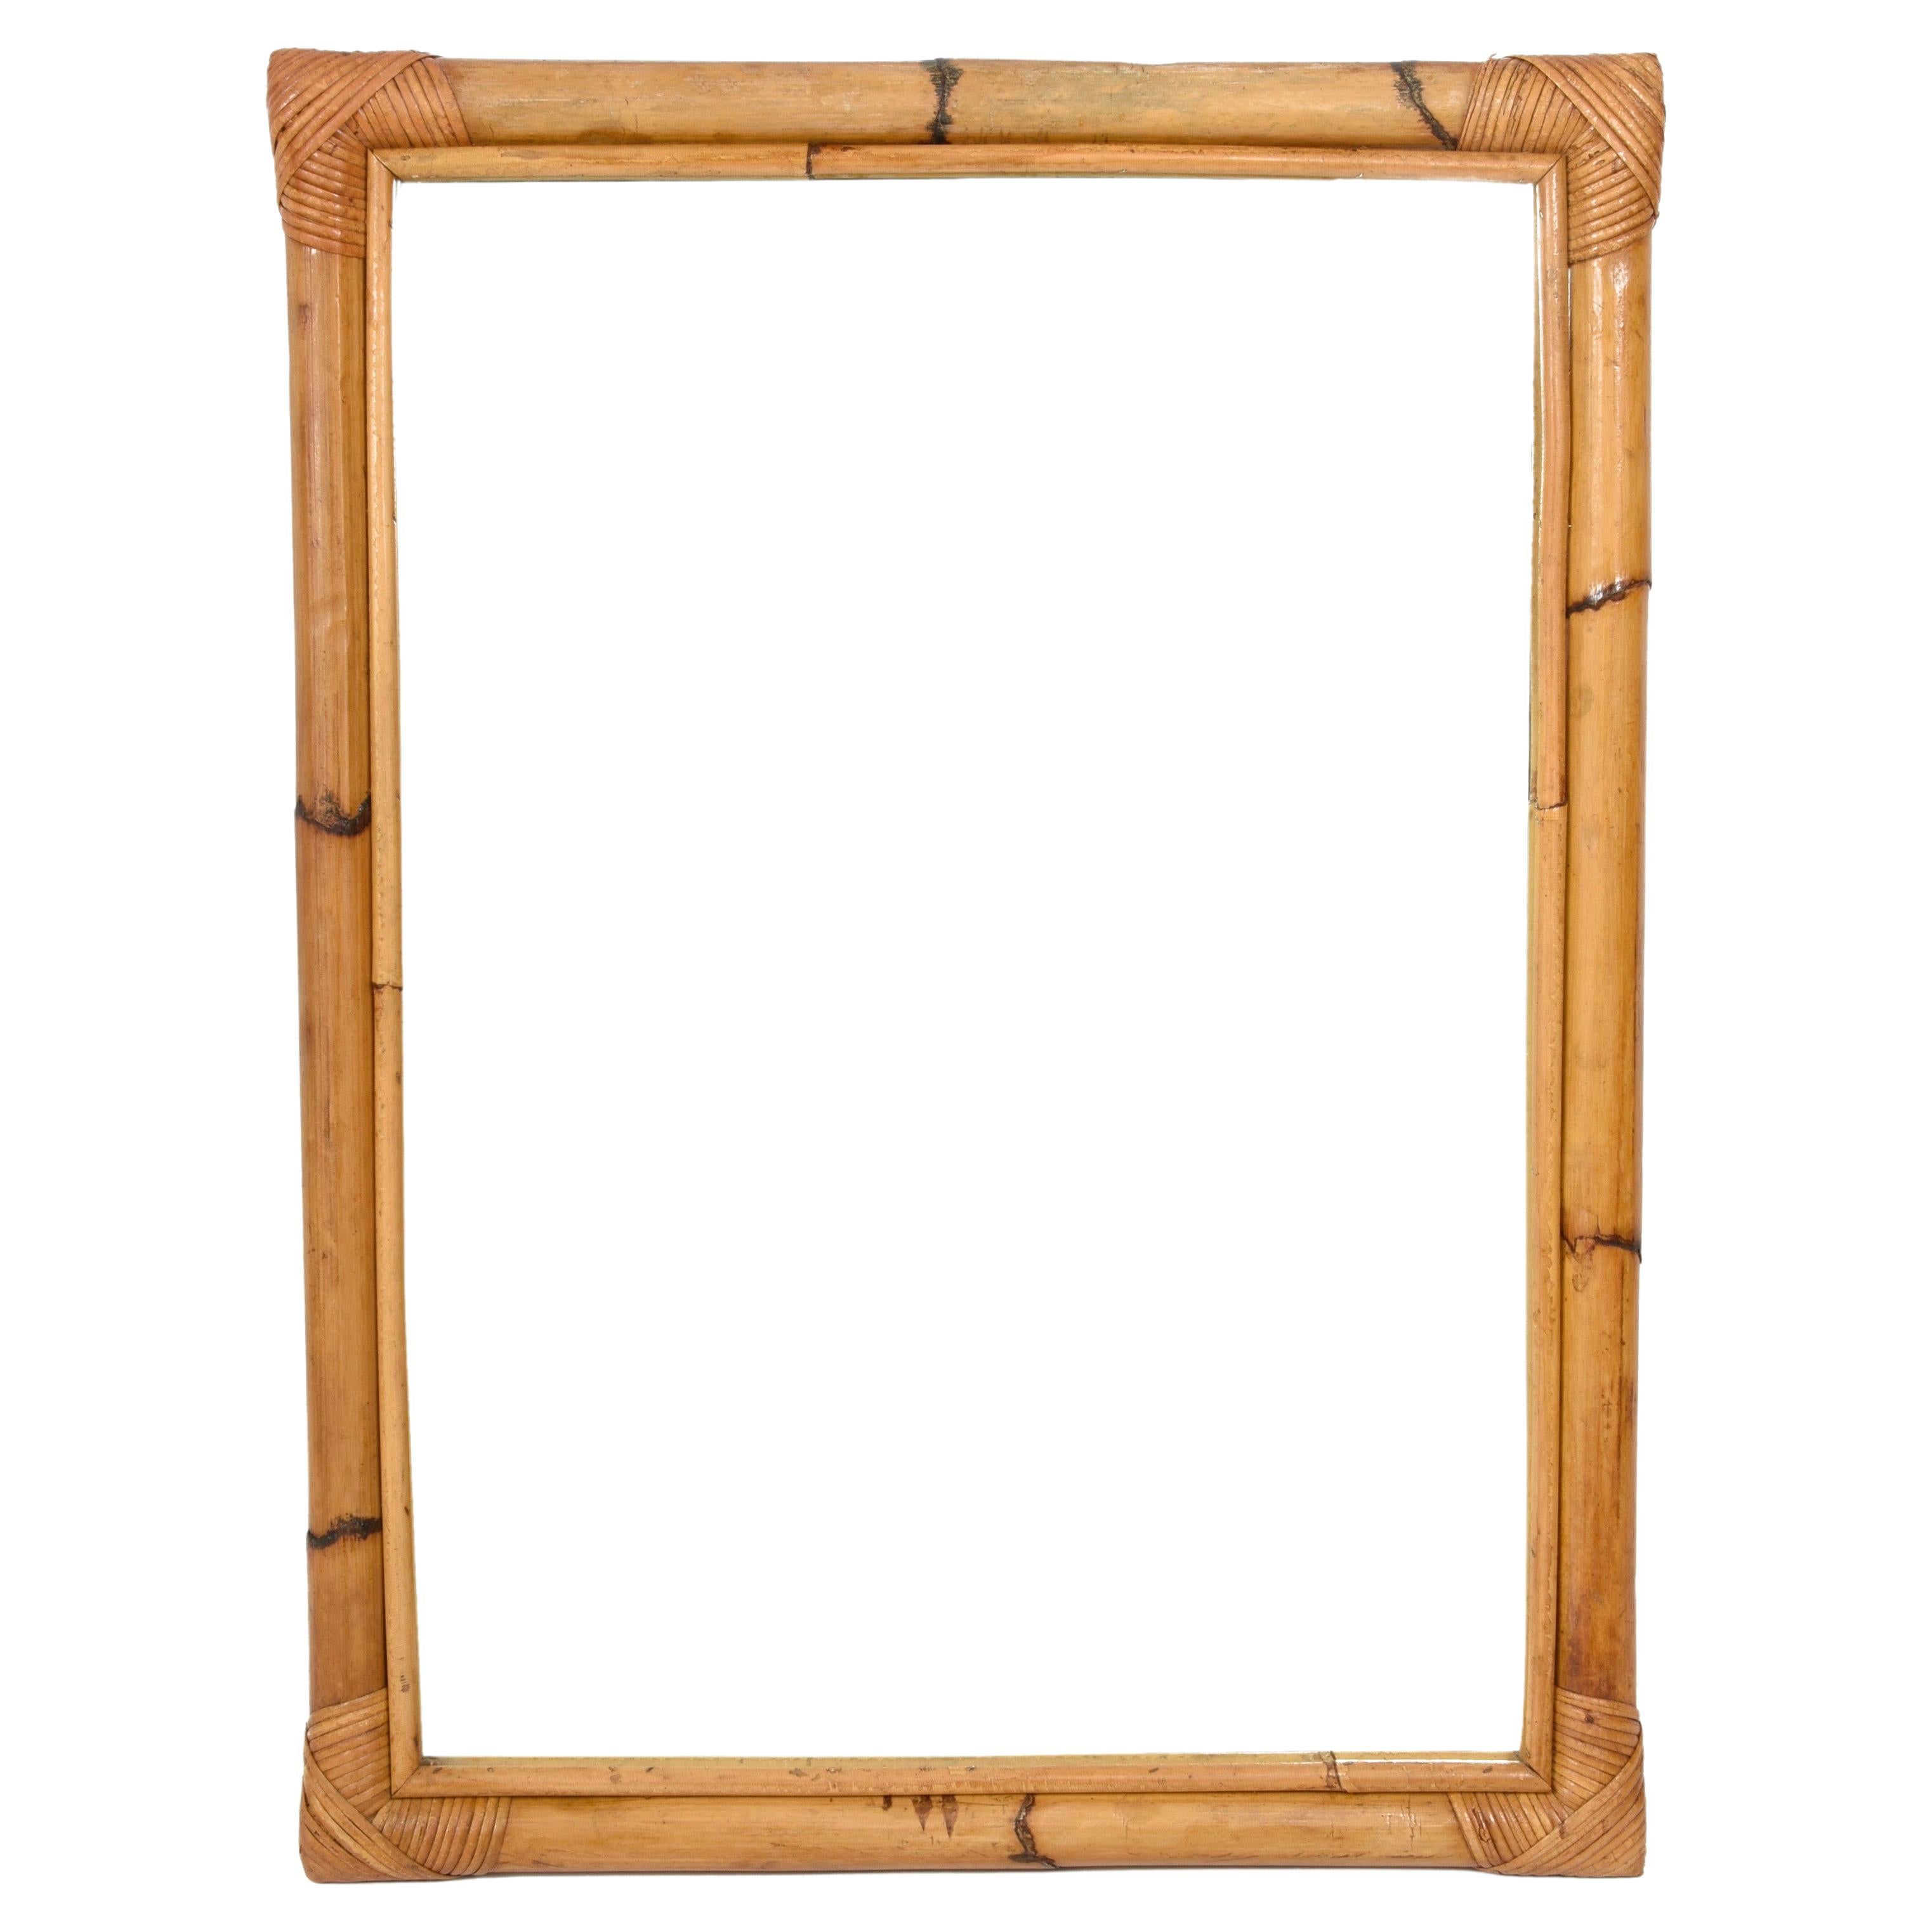 Marvellous midcentury rectangular mirror with double bamboo cane frame. This fantastic item was produced in Italy in the 1970s.

A magnificent product the way the straight lines of the bamboo integrate with the mirror is simply outstanding. The